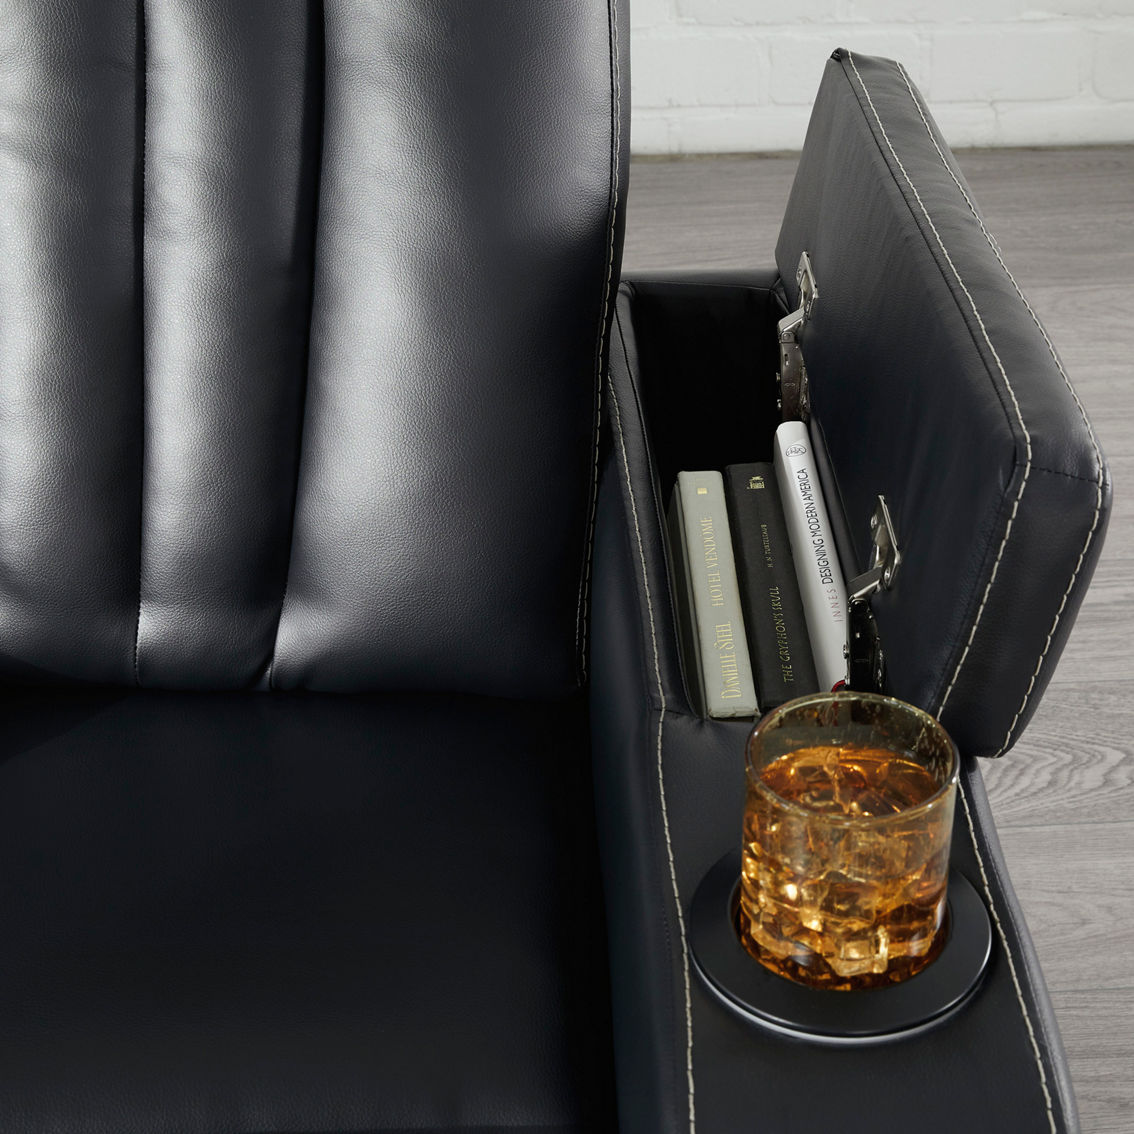 Signature Design by Ashley Center Point Reclining Sofa with Drop Down Table - Image 7 of 10